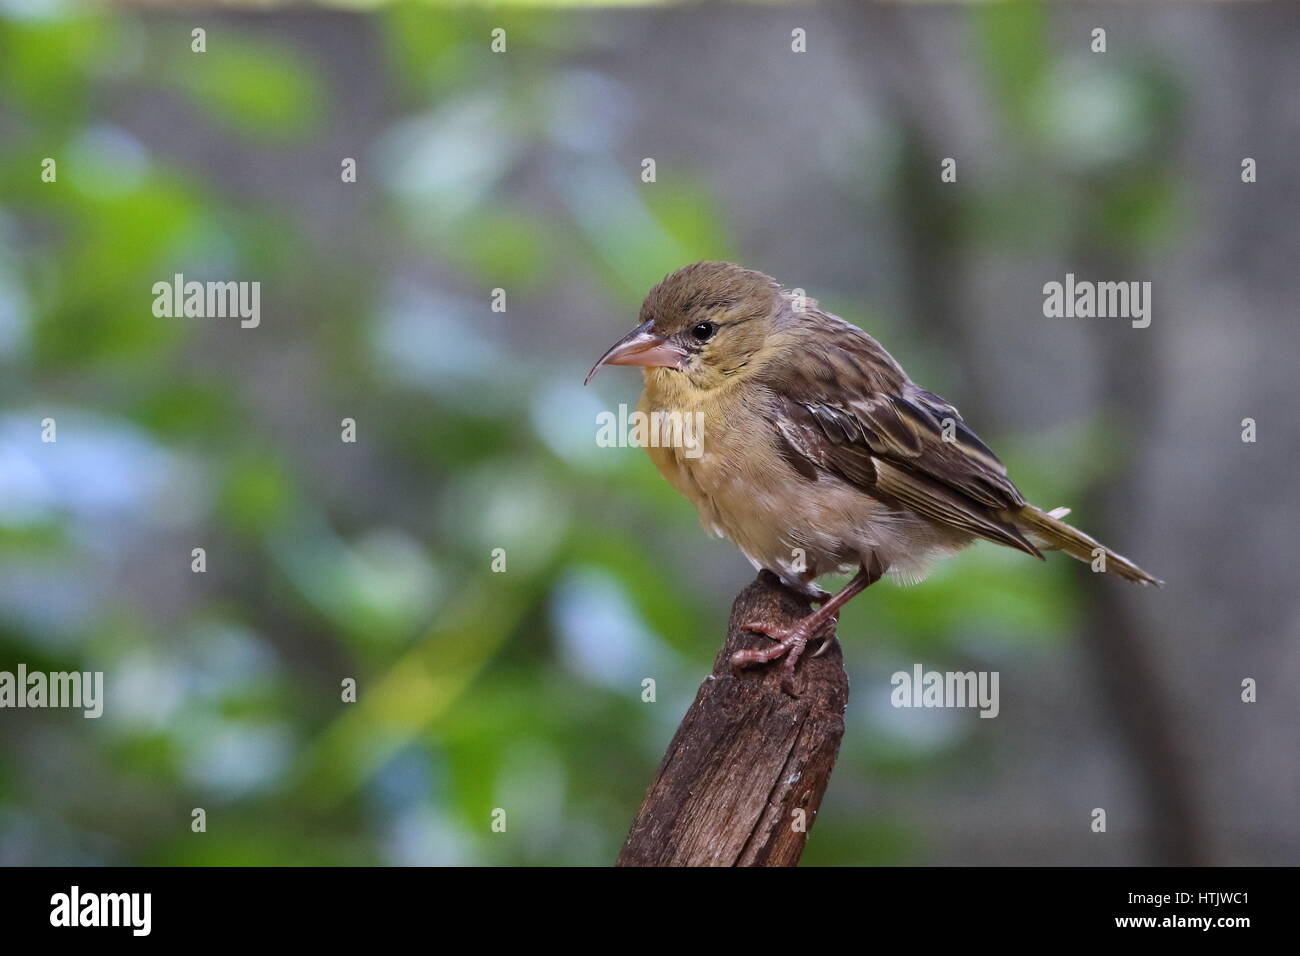 Imperfection in nature - a bird with a deformed bill image in landscape format with copy space Stock Photo